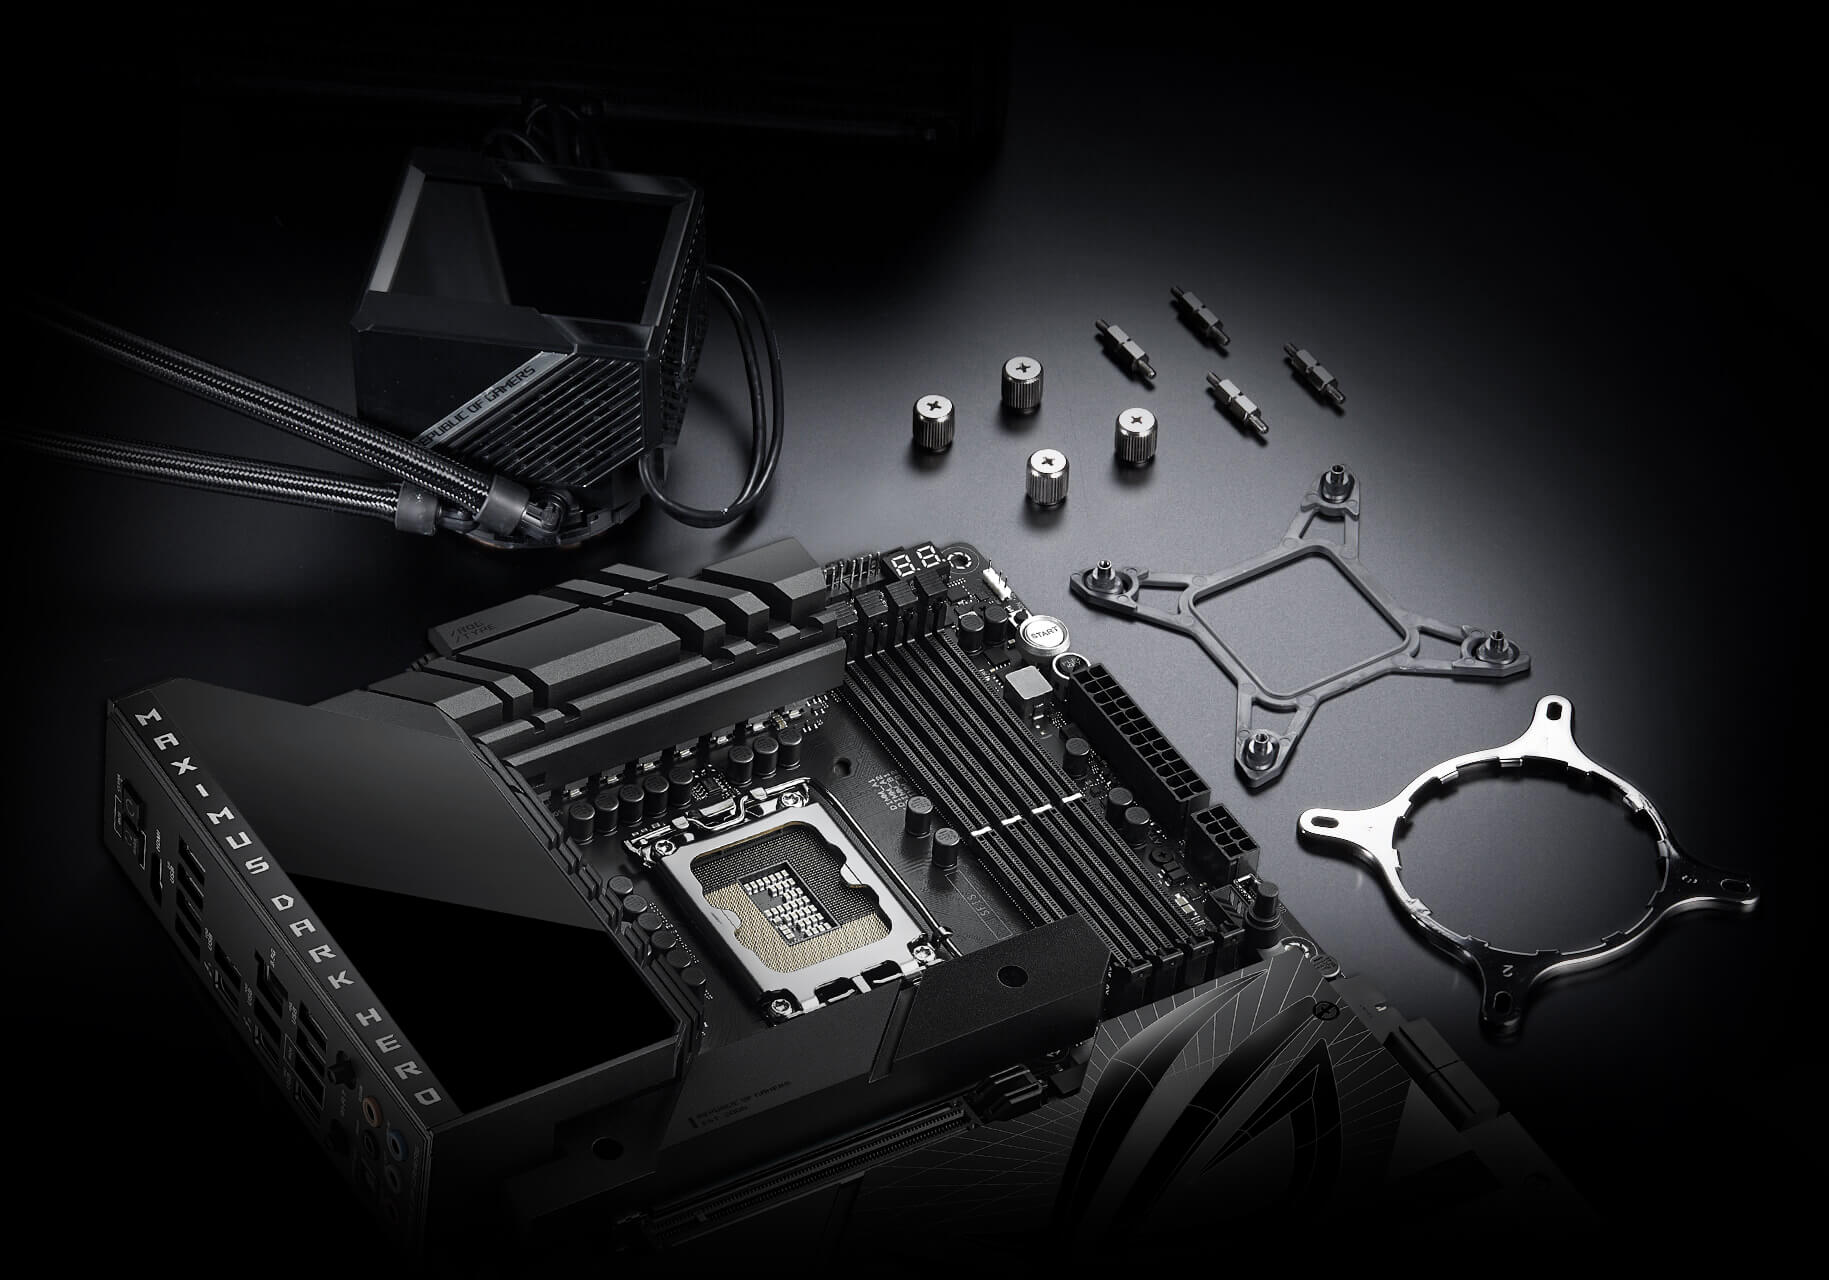 The ROG Maximus Z790 Dark Hero is compatible with all ASUS AIO coolers.